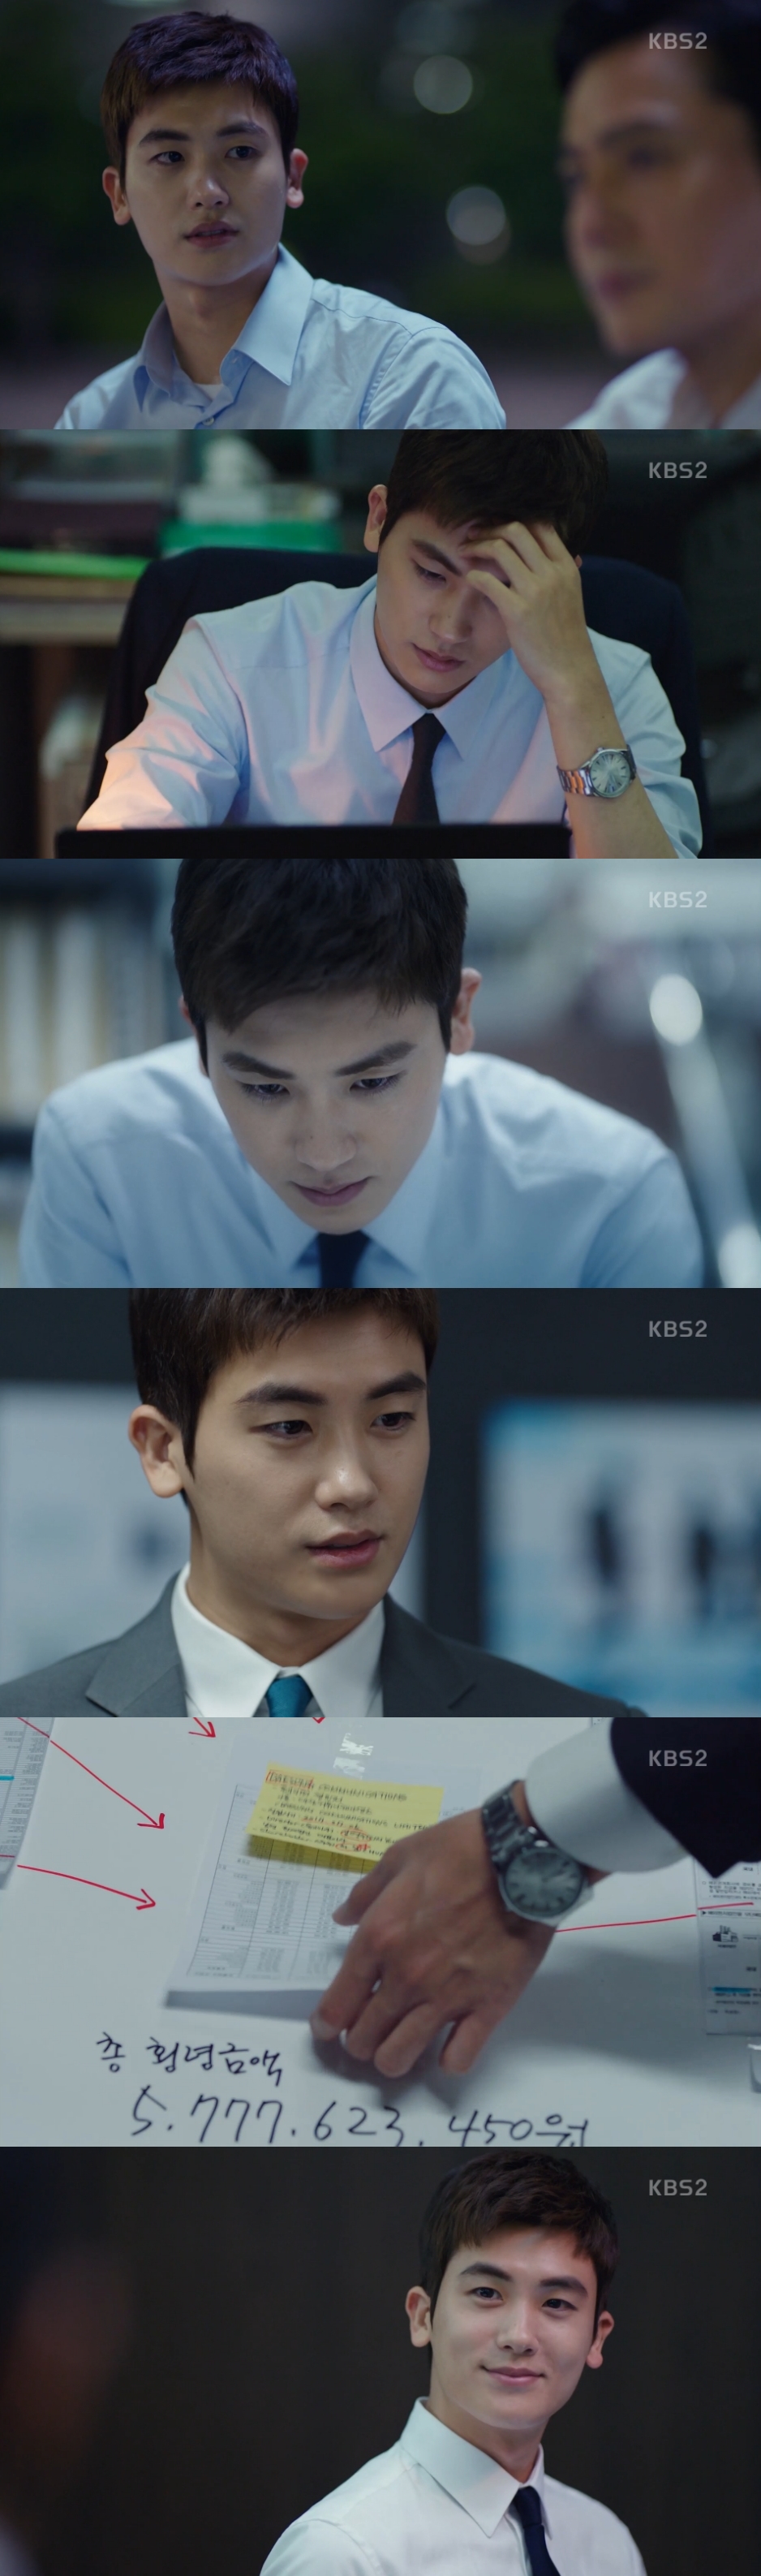 Suits Park Hyung-sik has become a full-time lawyer, although its still fake.Sometimes there are fakes that are more real than real, and there is a real one that gets so used to it or is self-confident that it misses the core.But there are fakes that are not real, so desperate that they can see through the core.It is the story of Park Hyung-sik (played by Ko Yeon-woo) in KBS2s tree drama Suits (played by Kim Jung-min, director Kim Jin-woo, and production monster union entertainment Pictures).In the play, Ko Yeon-woo had always dreamed of a lawyer, had the ability to be, but could not be, because he did not give him that the world was an opportunity.Such a late actress met a miraculous opportunity at the end of the cliff: an opportunity to work as a new lawyer at South Koreas top Law Firm.He was desperate, and he had a chance to get rid of it, and every day he was found out, Danger is growing up as a lawyer in it.The 8th episode of Suits, which aired on the 17th, showed the growth of the late actress implicitly and impactfully.It grasped the core of the case of requesting dismissal of forgery employees and found out the large amount of embezzlement of large accounting corporations.Distribution that does not bend beliefs even though it is pushed to the dismissal Danger, not just seeing events, but seeing people in the case.He showed the same ability and activity more real than a real lawyer.Thanks to this, Ko Yeon-woo led the South Koreas top law firm Gang & Ham representative Kang Ha-yeon (Jin Hee-kyung) to the word formal lawyer from today.Now, Ko is no longer a lawyer for Kang & Ham. He is a formal lawyer.It is natural to expect what kind of performance Ko Yeon-woo, who showed such outstanding ability and unstoppable growth when assisting Choi Kang-seoks work as a lawyer for probation, will perform when he becomes a regular lawyer.In fact, Suits is a kind of growth drama from the standpoint of Ko Yeon-woo, which is also a counter-electrode that overturns the preconceptions that are framed.This is a storyline that can draw consensus, but the character itself, with its genius matching king, is not common: it must contain both opposite aspects.The role of the actor is an important role.In this sense, the performance of Park Hyung-sik, an actor in Suits, is worth noting.It shows the sense of flexibly changing characters according to the situation change, the concentration of acting ability that leads to the audiences empathy and immersion, and the excellent expressive power that surrounds all of these.As the drama grows more and more, the deepening acting comes to a greater charm.Park Hyung-sik, an actor in Suits, is a brilliant and attractive reason for viewers.Suits is a drama about the romance of a fake new lawyer with a legendary lawyer and a genius matching king of South Koreas top law firm.It airs every Wednesday and Thursday at 10 p.m.